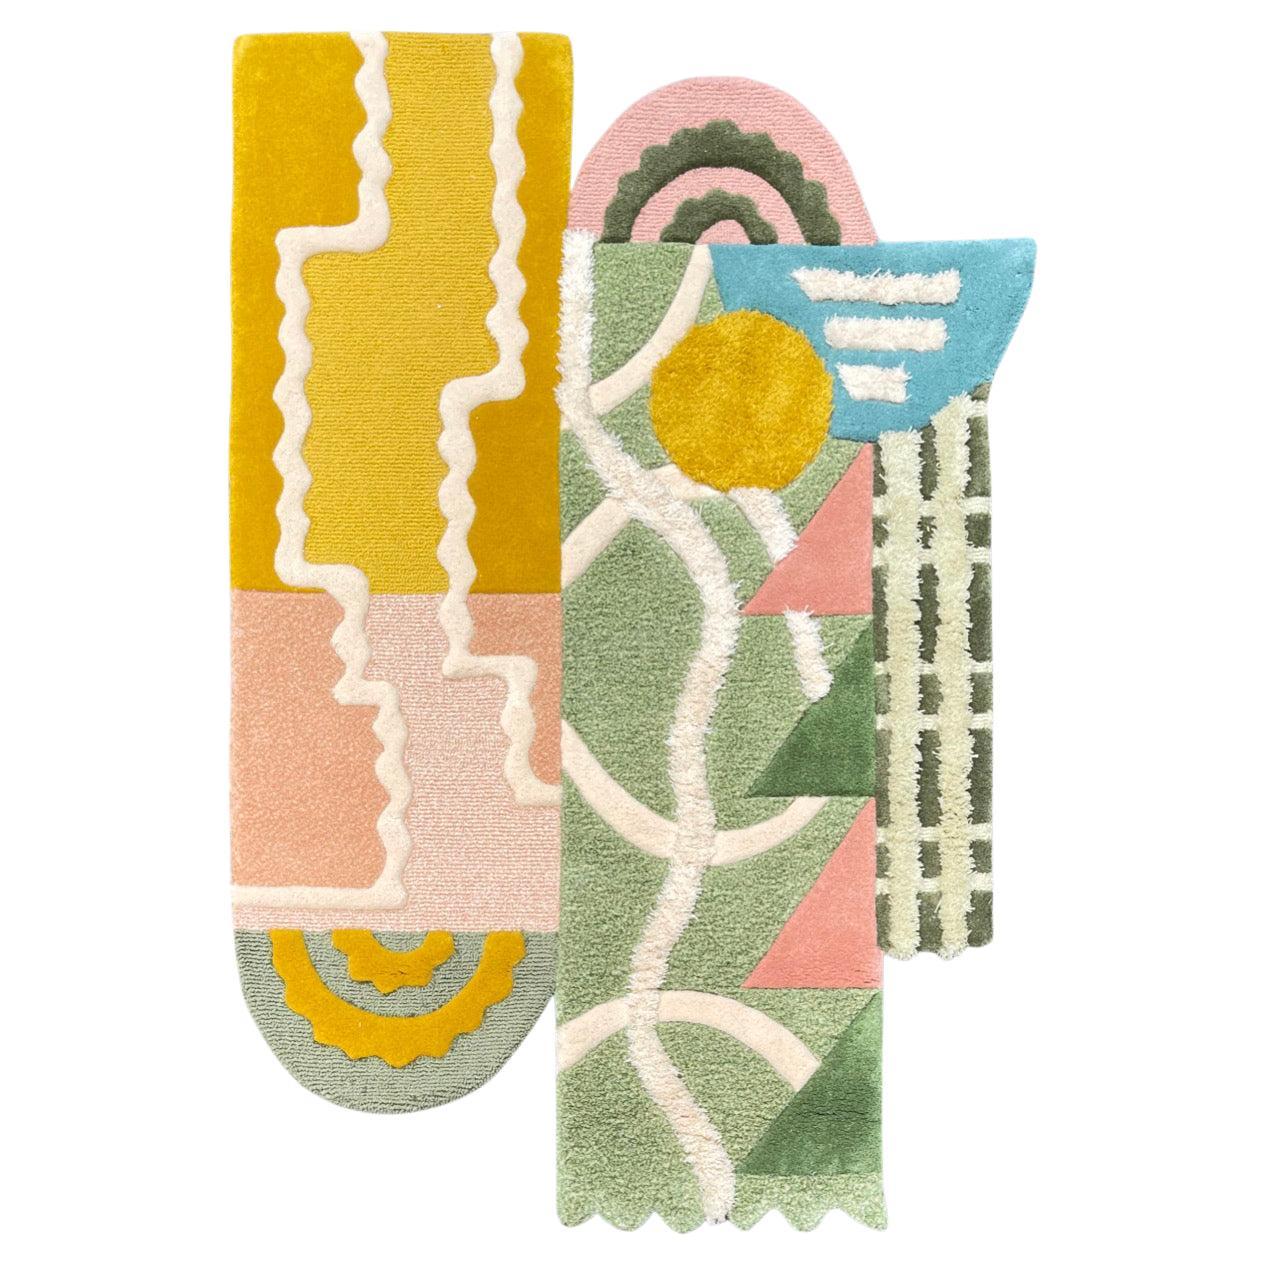 Irregular Shape Hand-Tufted Wool Rug with Mixed Yellow Colours by RAG Home